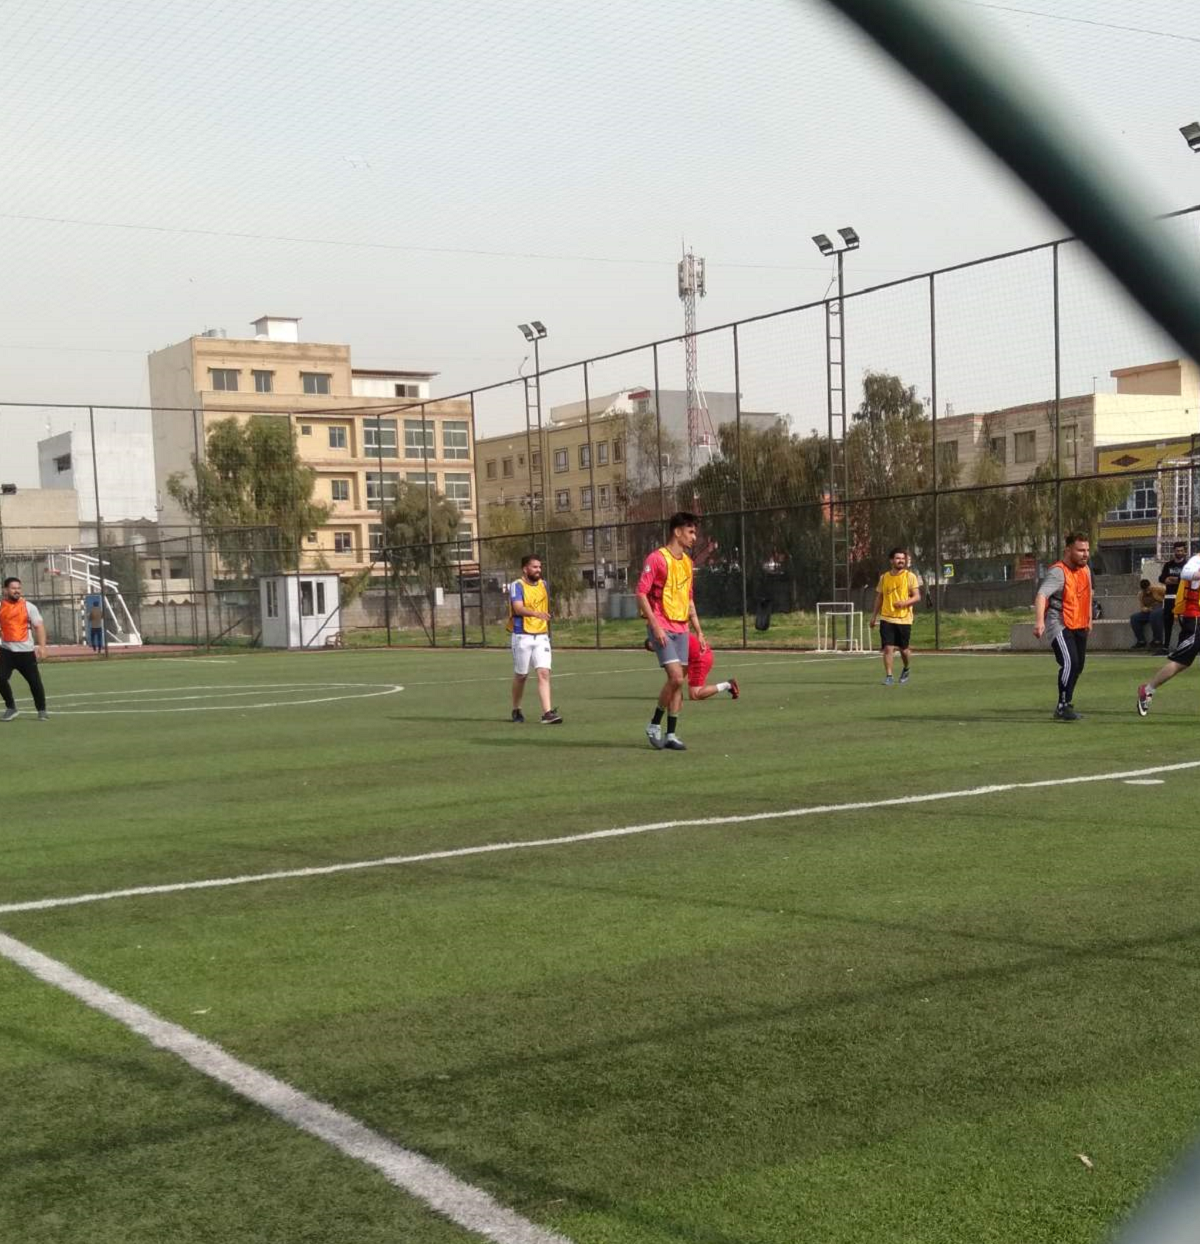 Supervising the friendly matches that took place between students of different departments at Cihan University